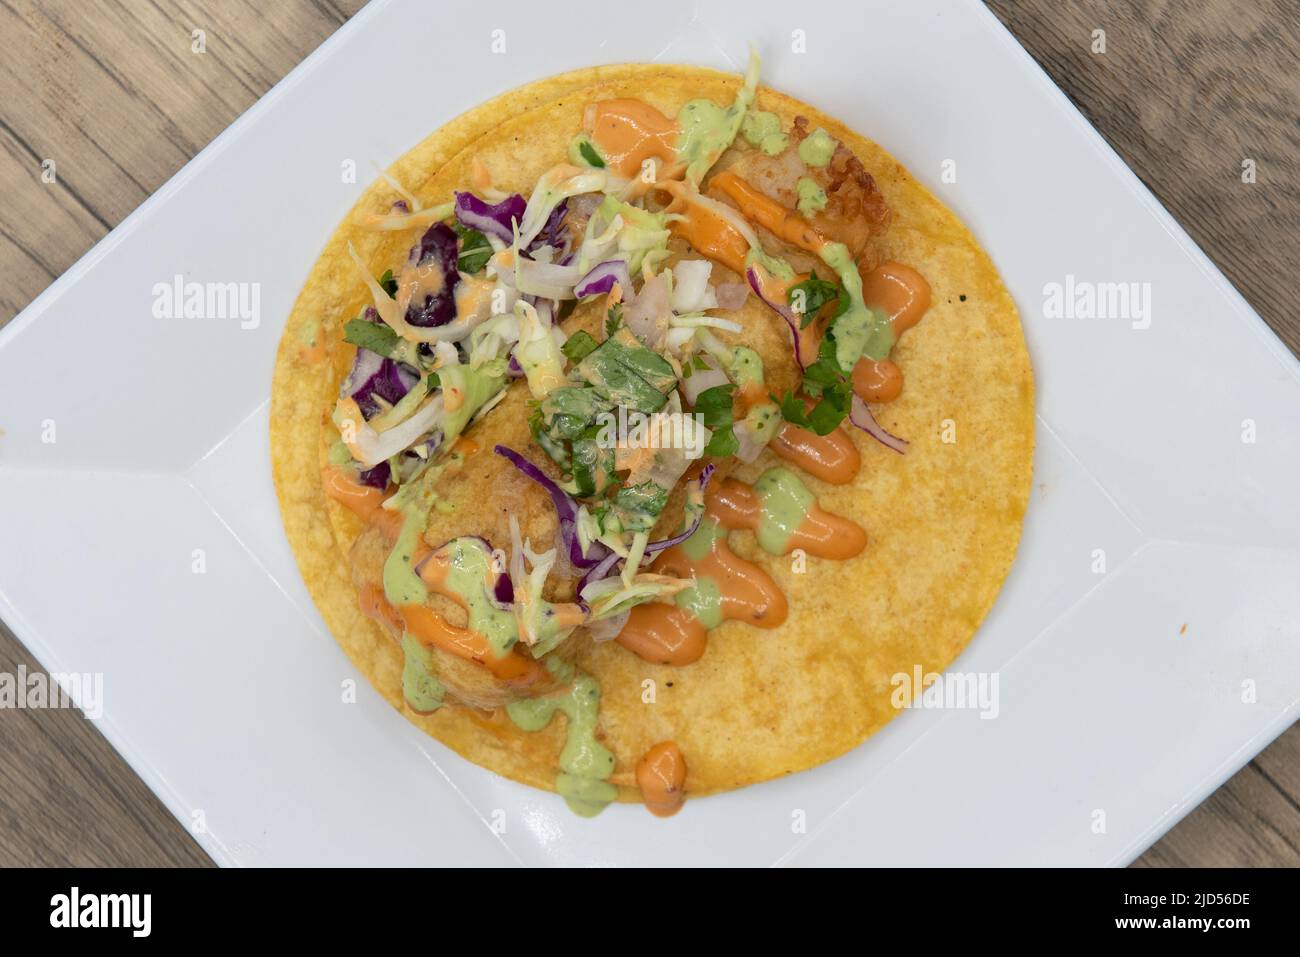 Overhead view of appetizing fish taco with perfect presentation for a tempting Mexican food delicacy. Stock Photo